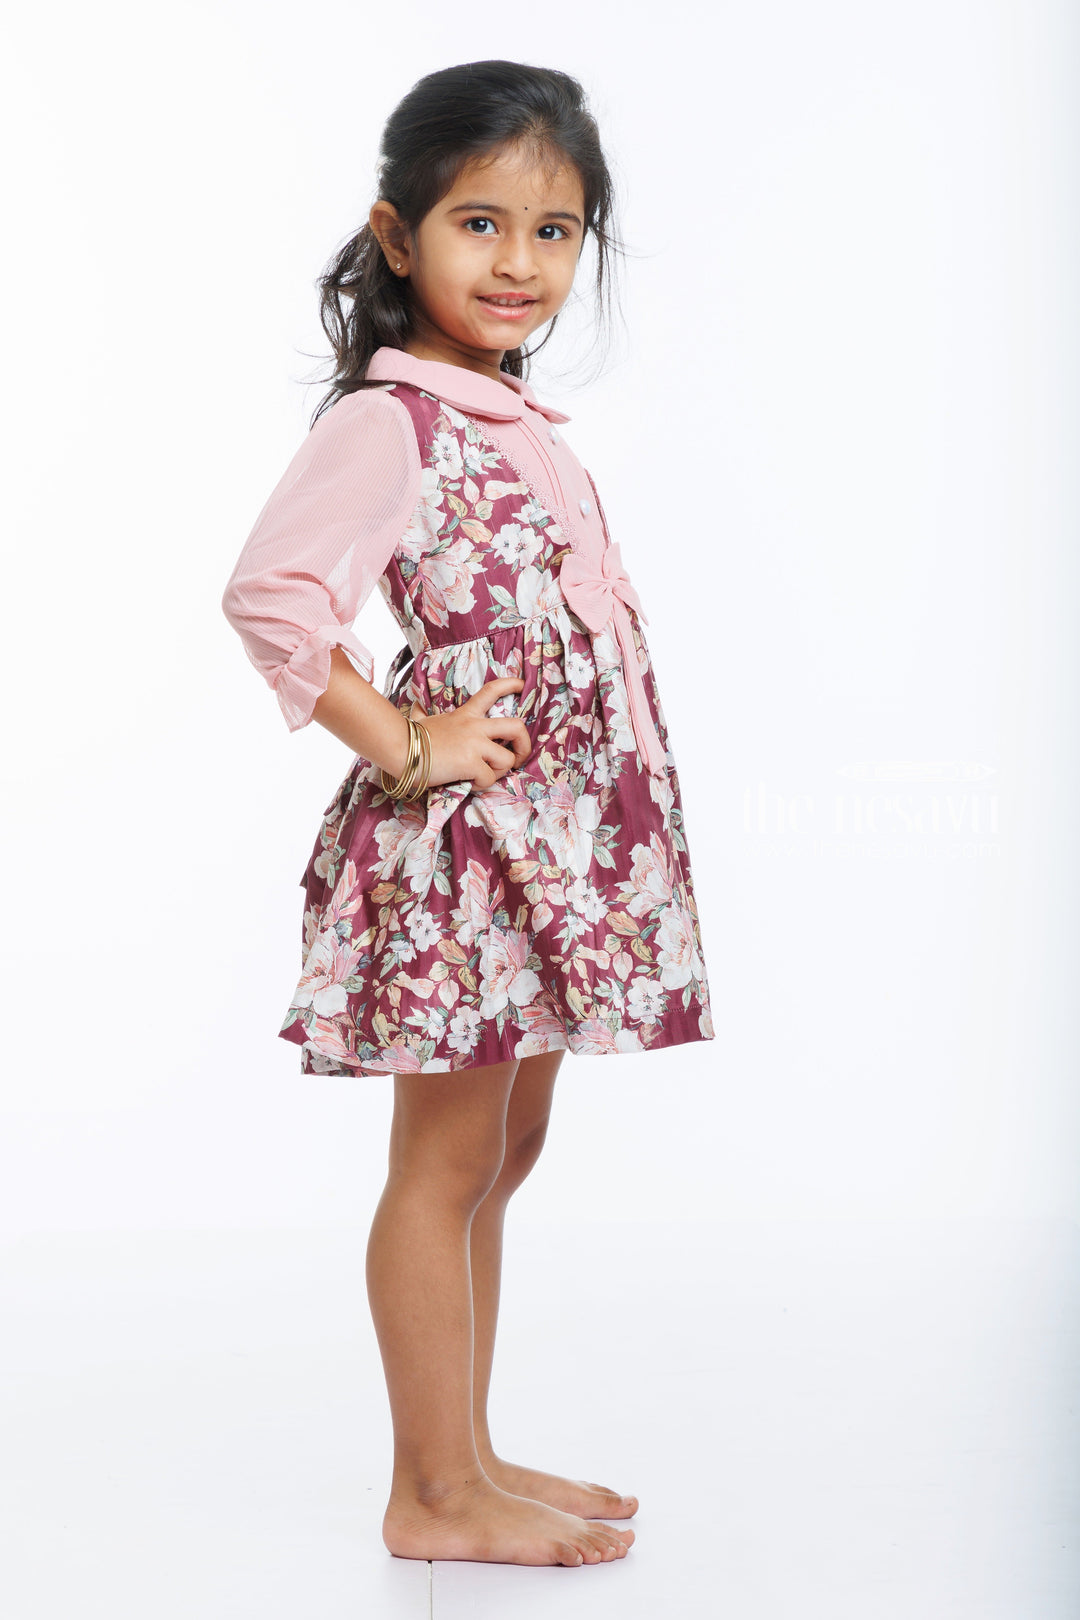 The Nesavu Girls Fancy Frock Vintage Bloom Floral Printed Fancy Frock with Bow Detail for Girls Nesavu Girls Fancy Floral Cotton Dress with Vintage Accents | The Nesavu